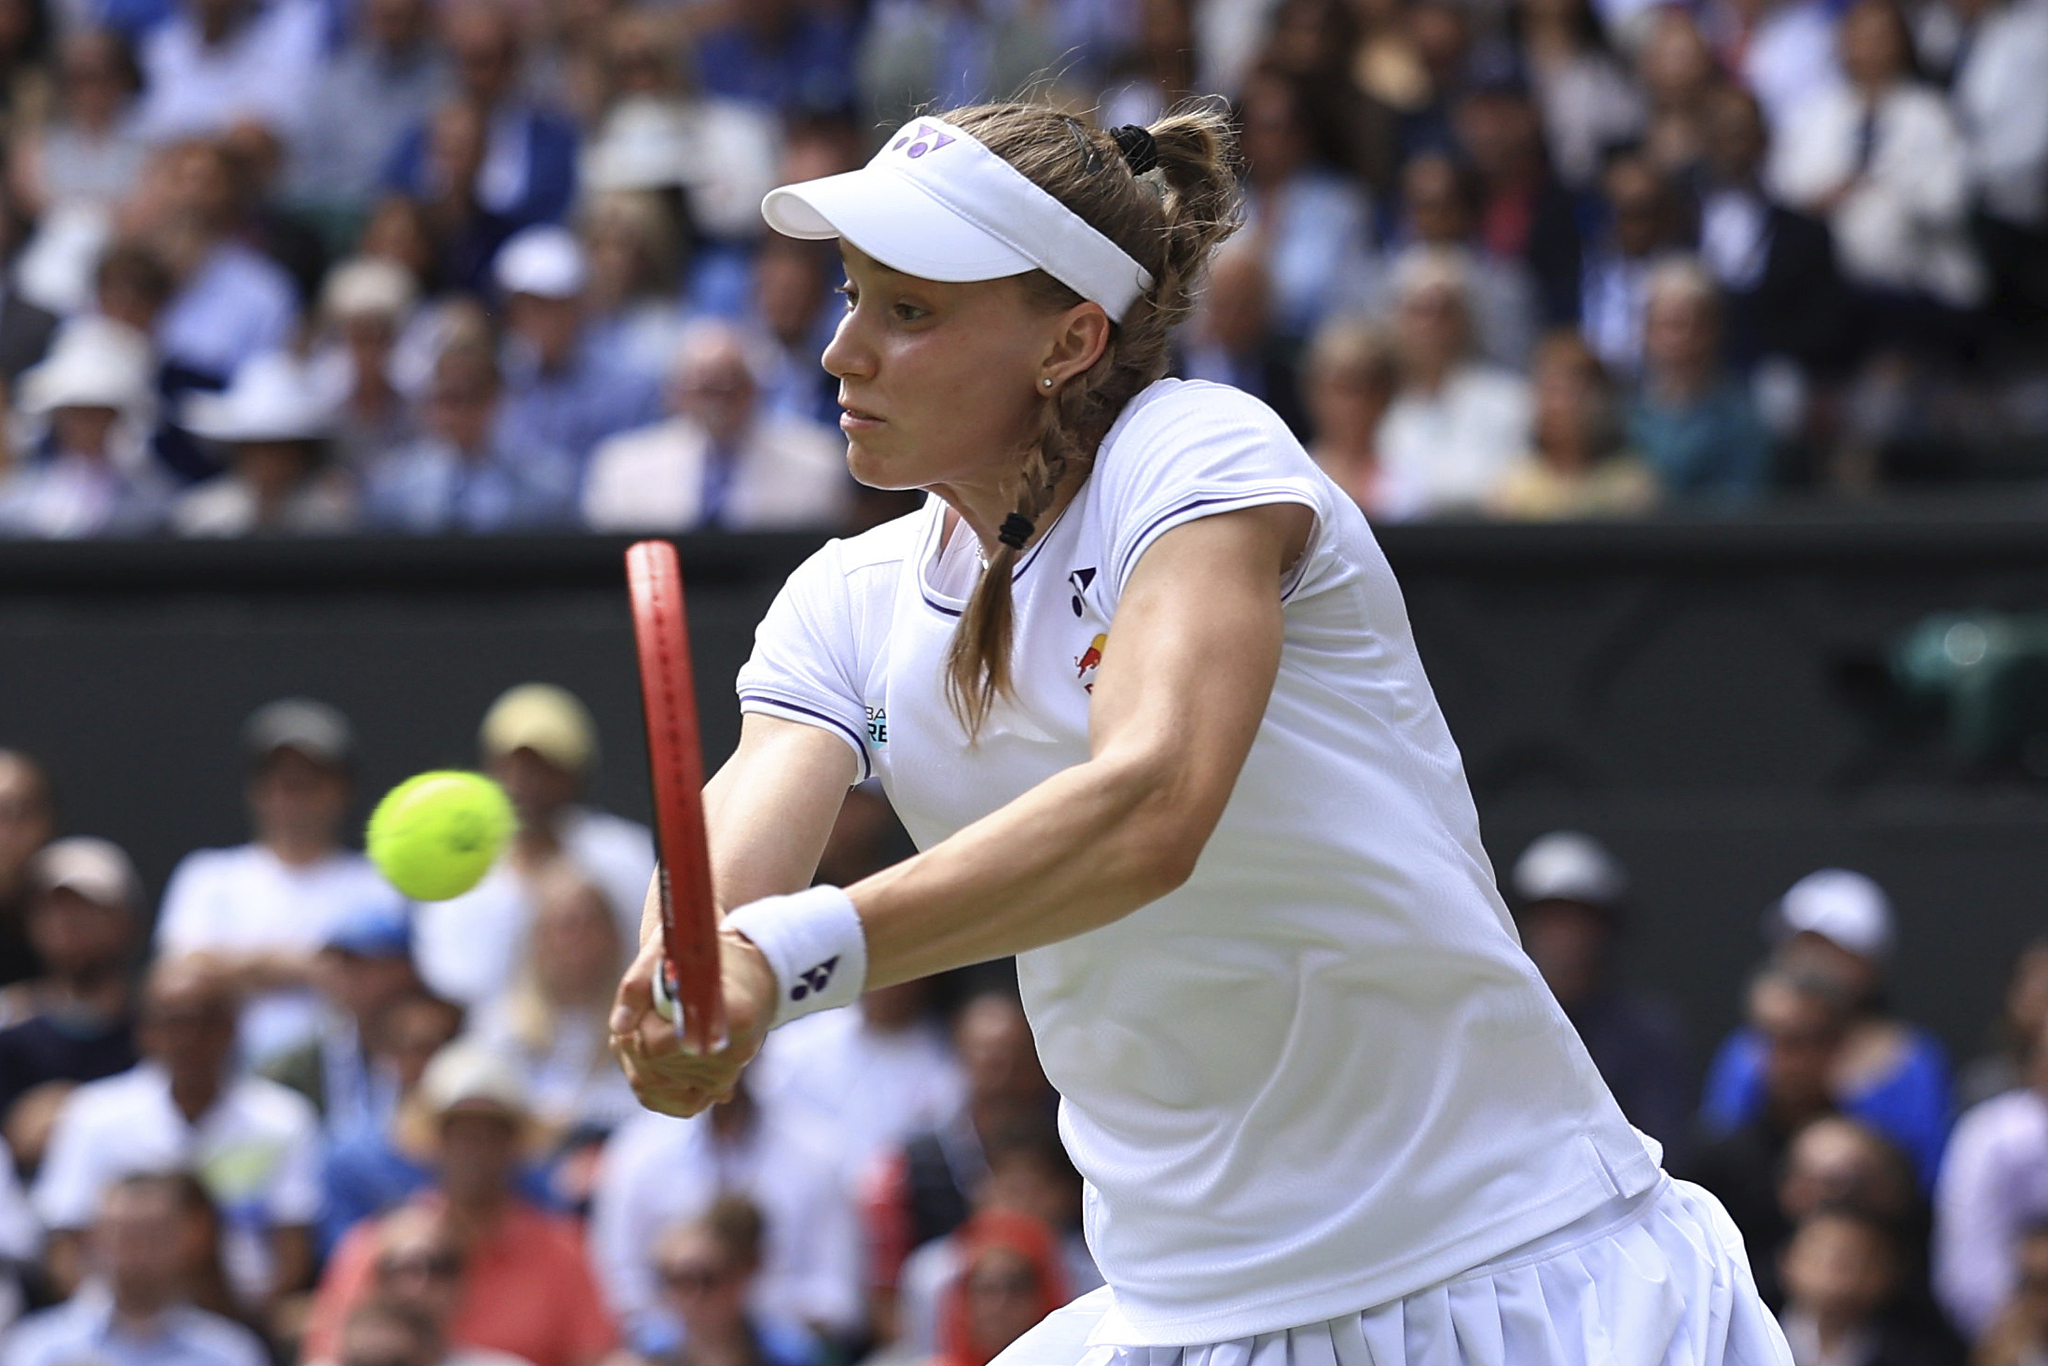 Elena Rybakina of Kazakhstan competes in a women's singles quarterfinal match against Elina Svitolina of Ukraine at the Wimbledon Championships at the All England Lawn Tennis and Croquet Club in London, United Kingdom, July 10, 2024. /CFP